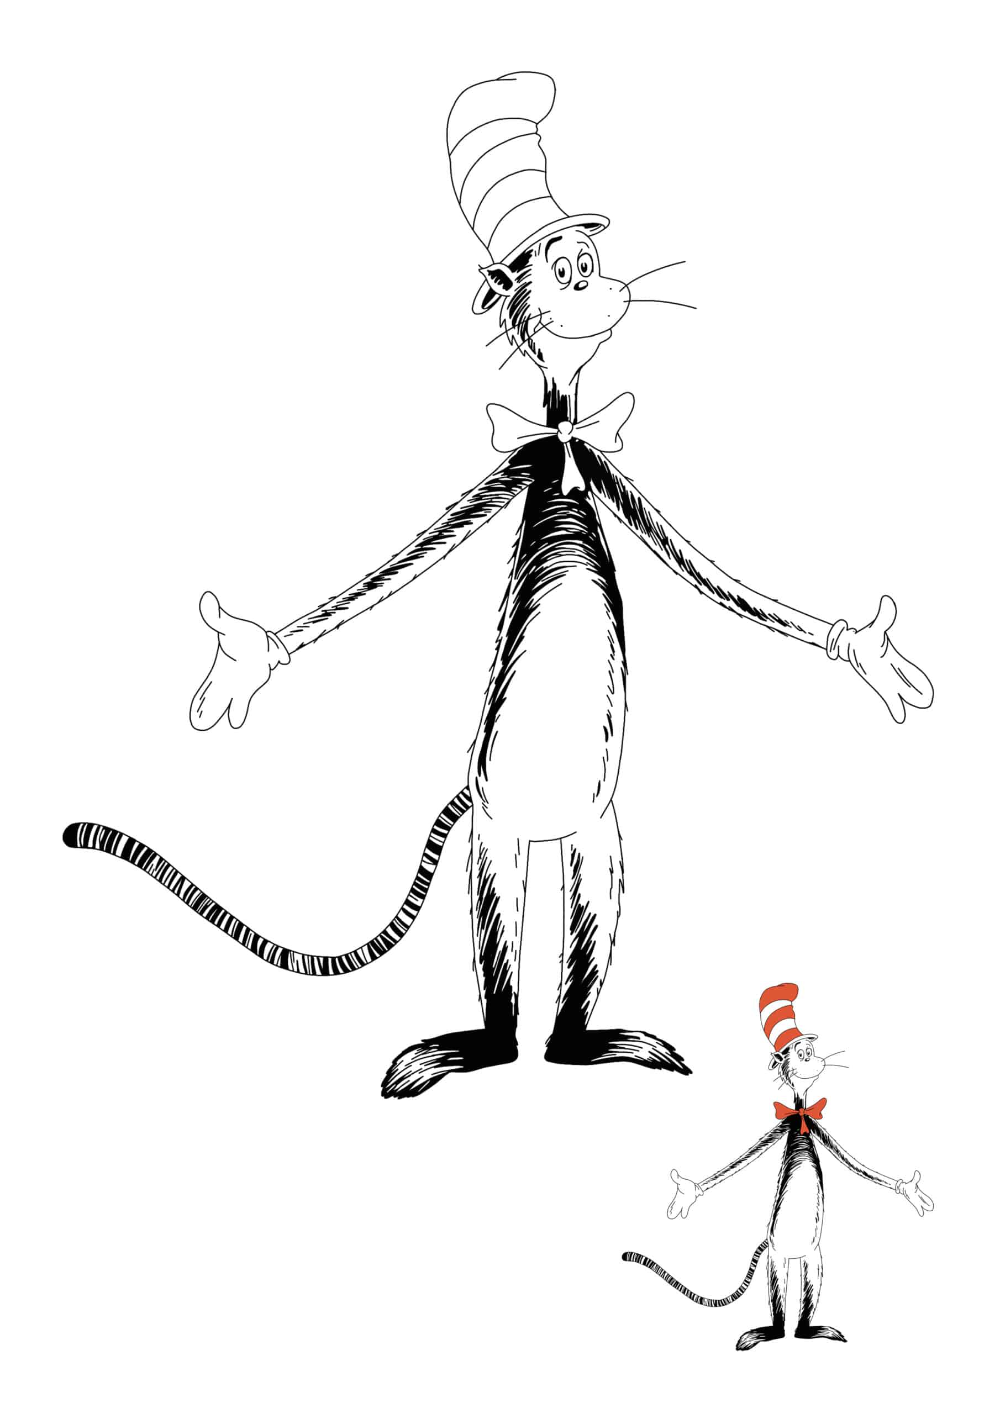 Cat in the hat coloring pages